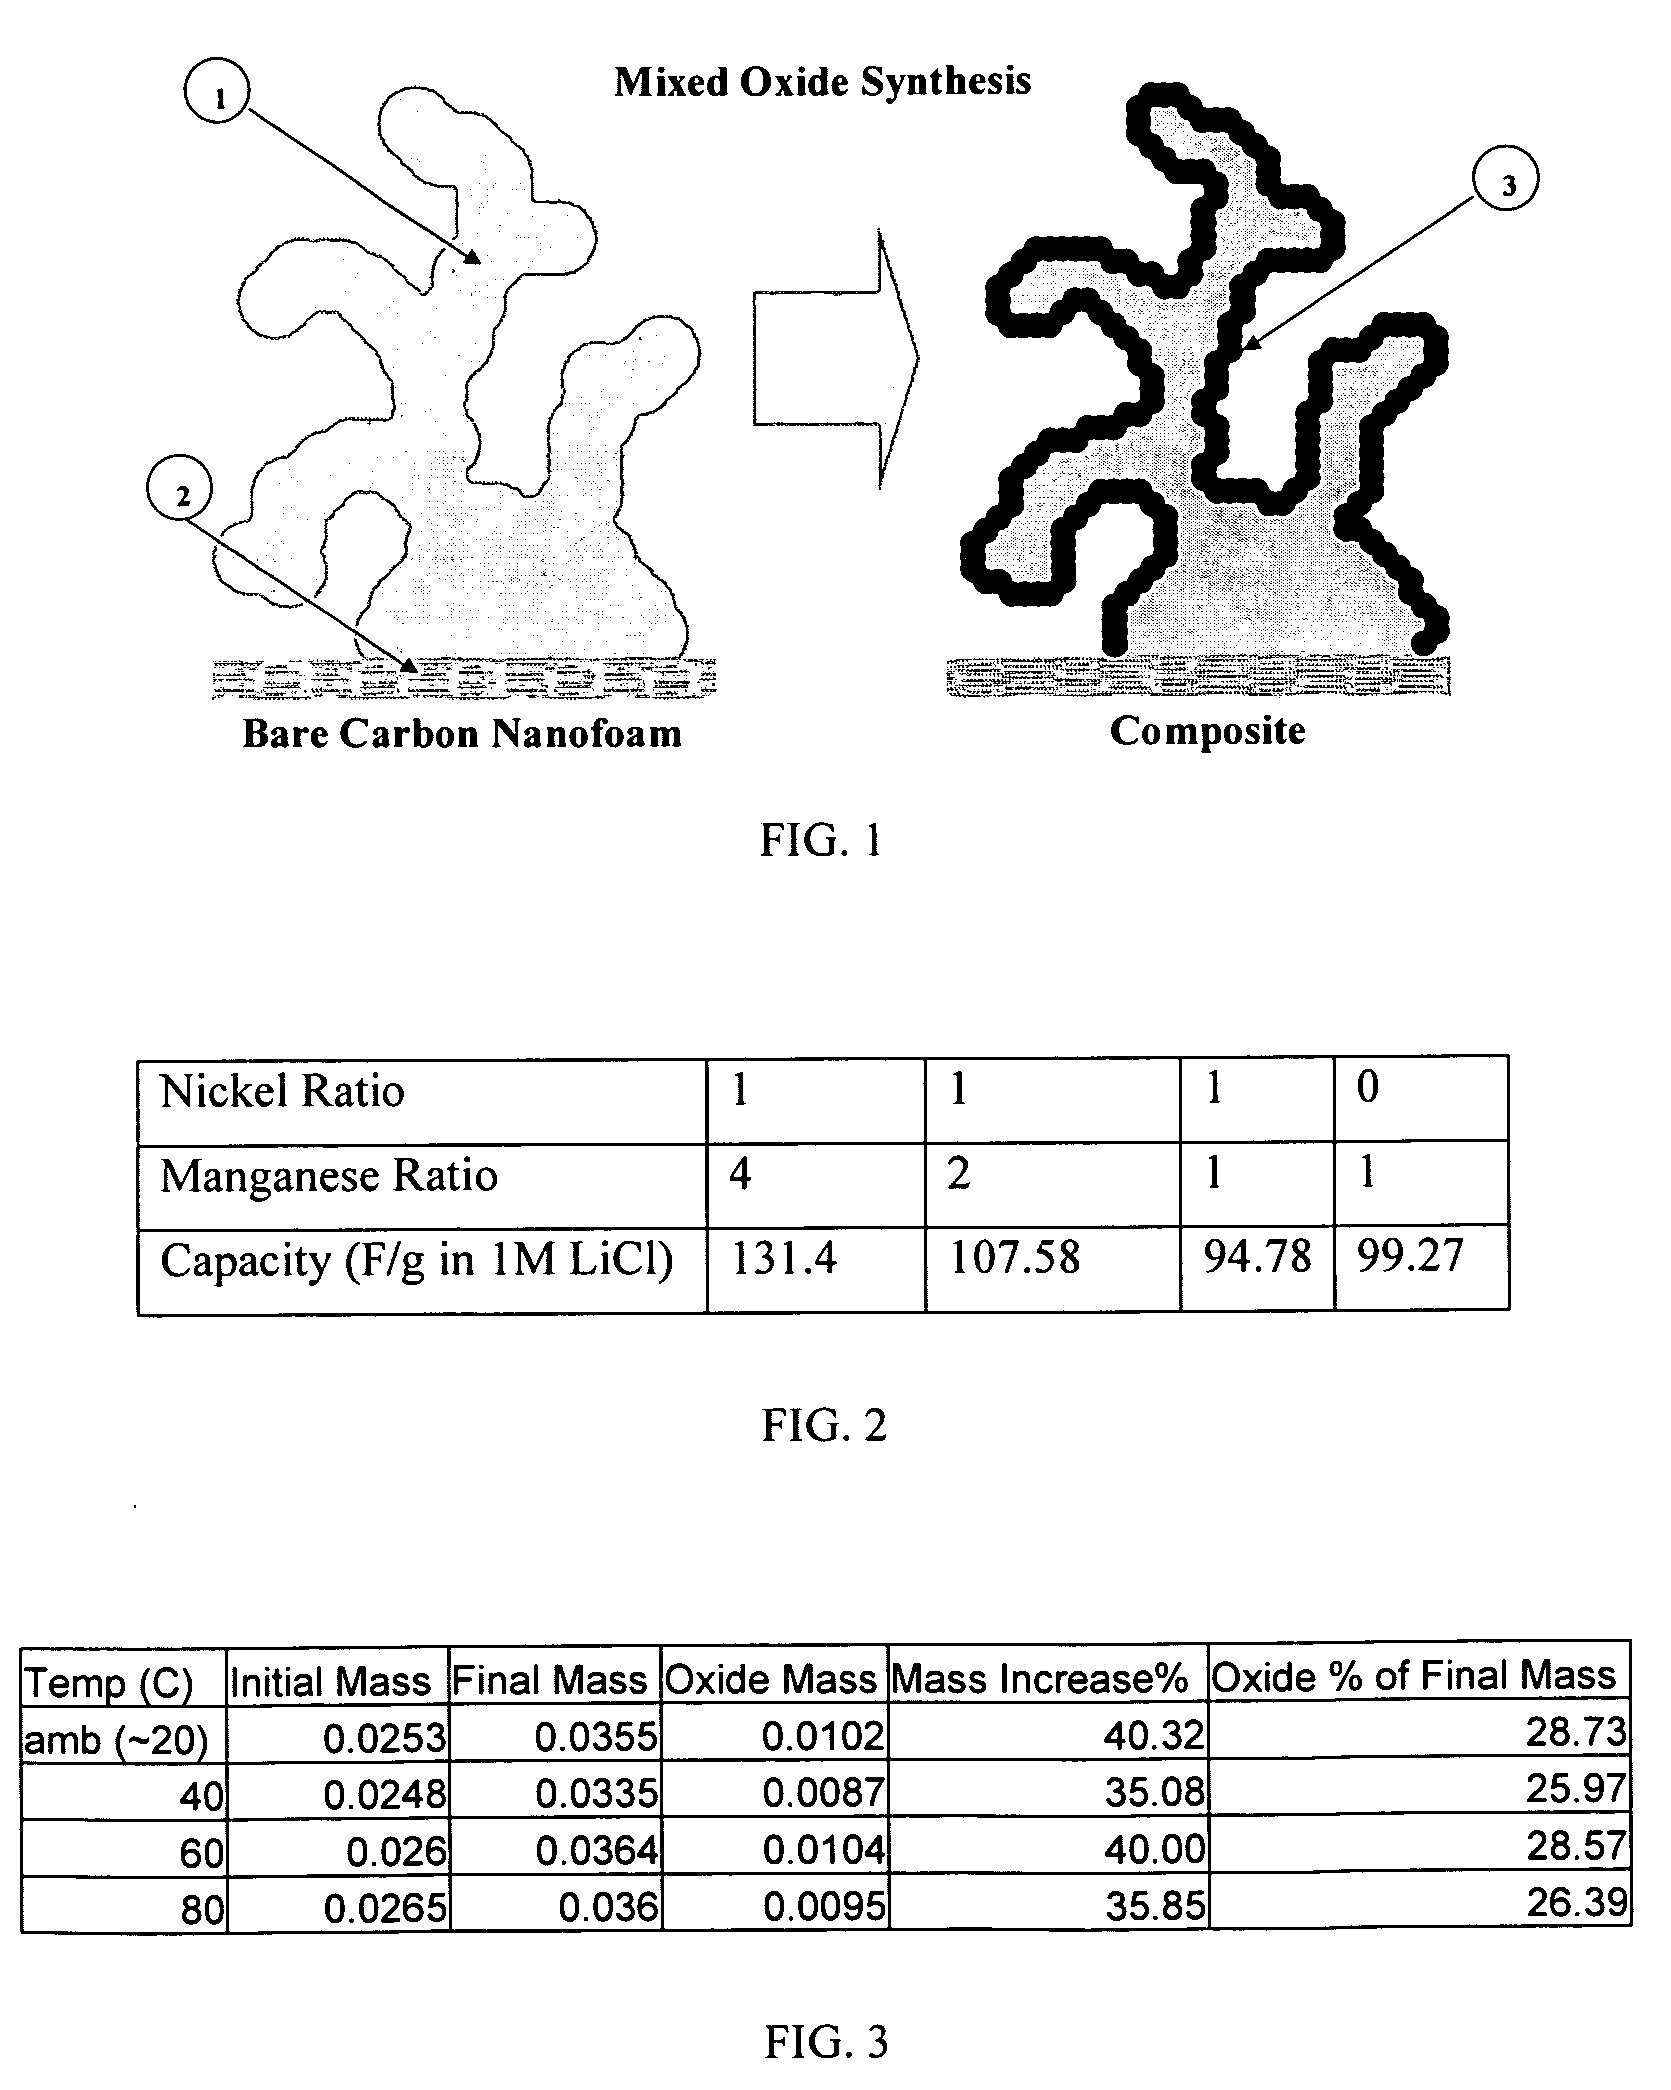 Composite electrode comprising a carbon structure coated with a thin film of mixed metal oxides for electrochemical energy storage